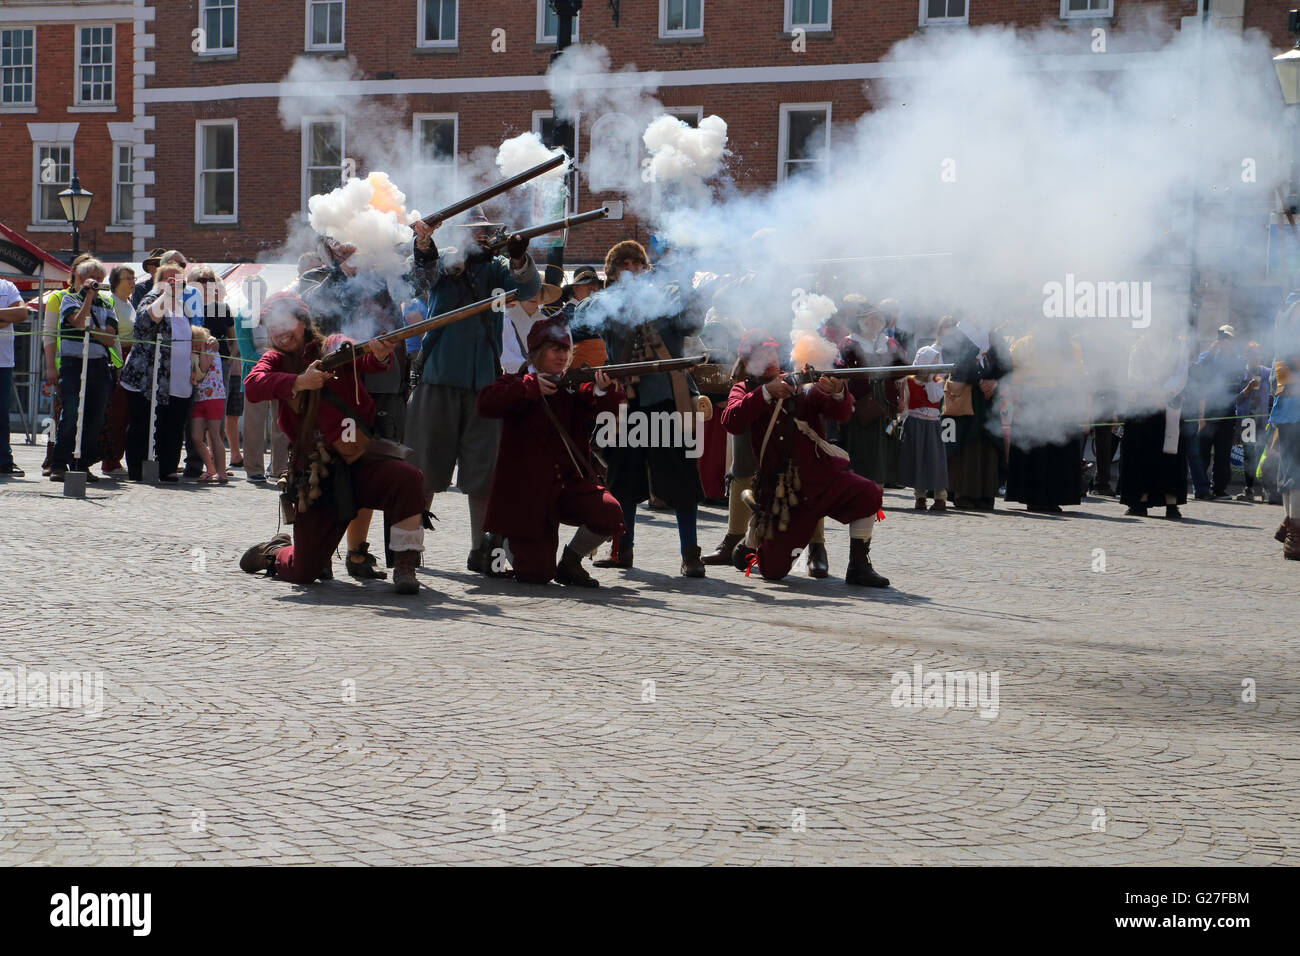 Members of the sealed knot historical reenactment society firing off matchlock rifles in the market place of Newark on Trent Stock Photo